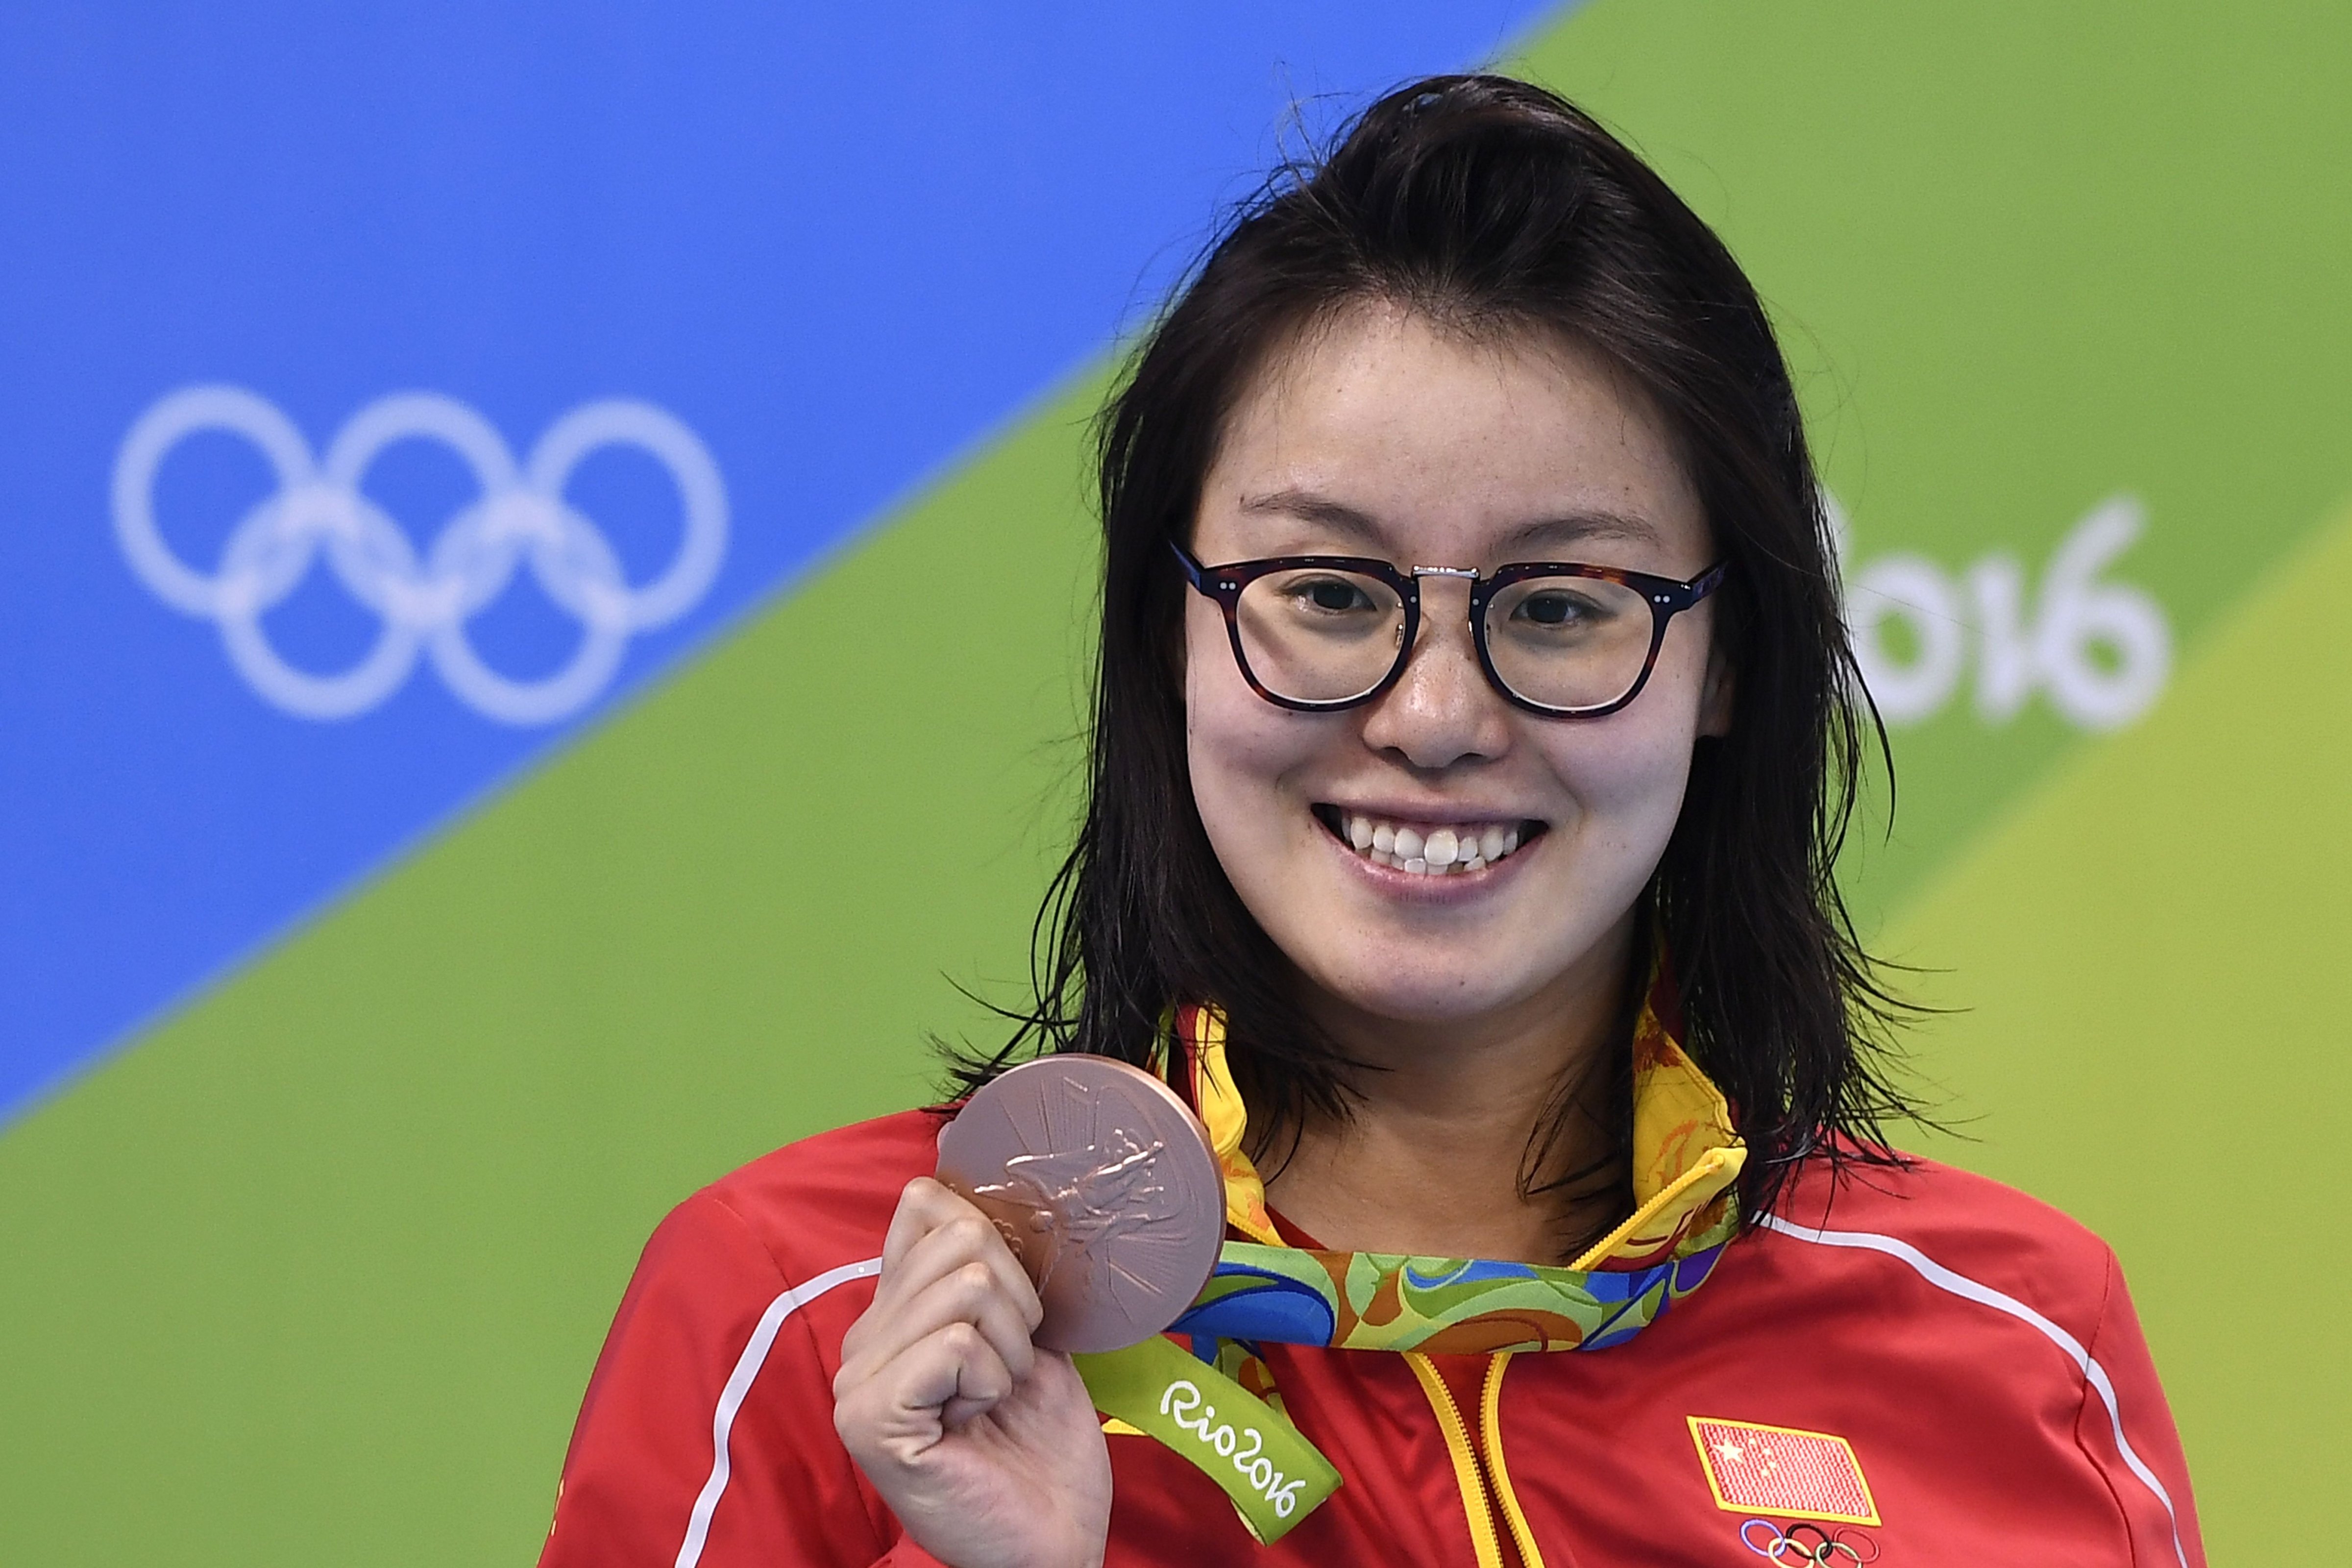 China's Fu Yuanhui poses with her bronze medal on the podium of the Women's 100m Backstroke during the swimming event at the Rio 2016 Olympic Games at the Olympic Aquatics Stadium in Rio de Janeiro on August 8, 2016. (Gabrial Bouys—AFP/Getty Images)